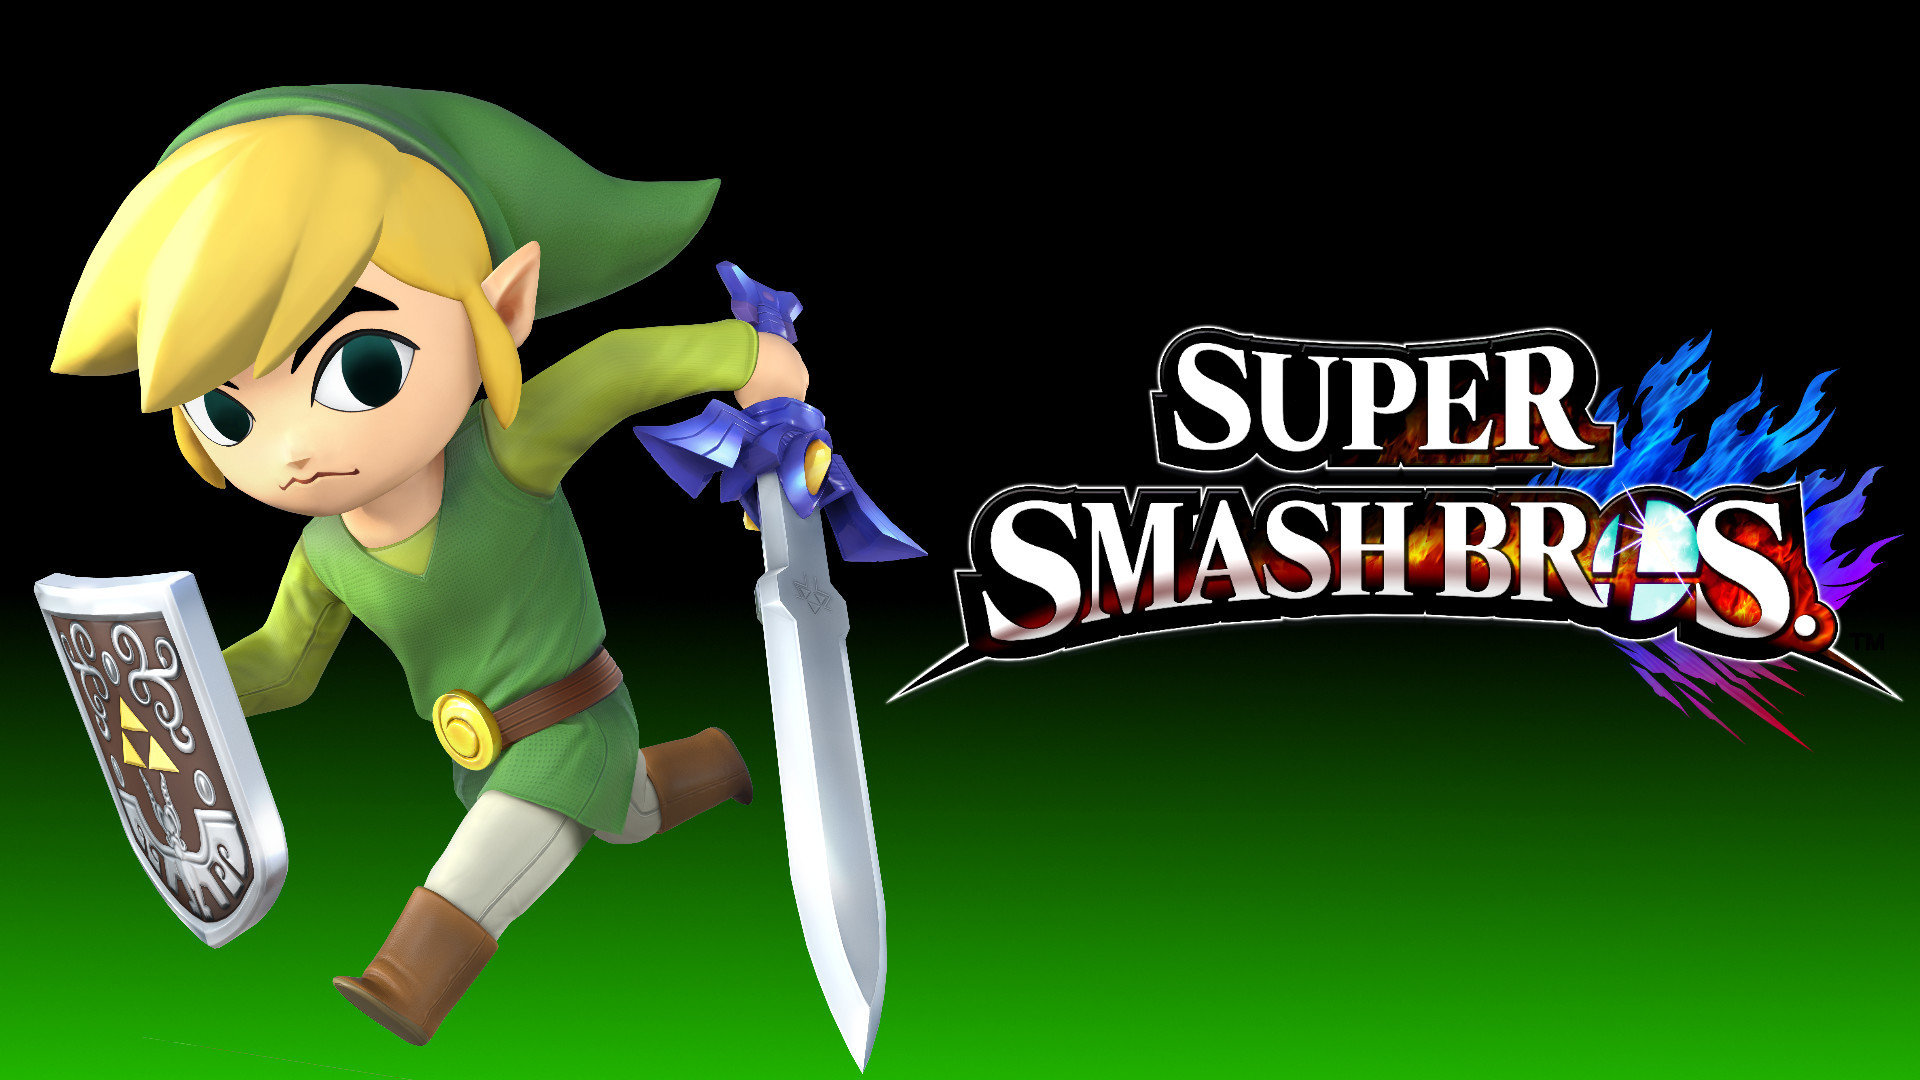 1920x1080  4 Wallpaper - Toon Link by TheWolfGalaxy